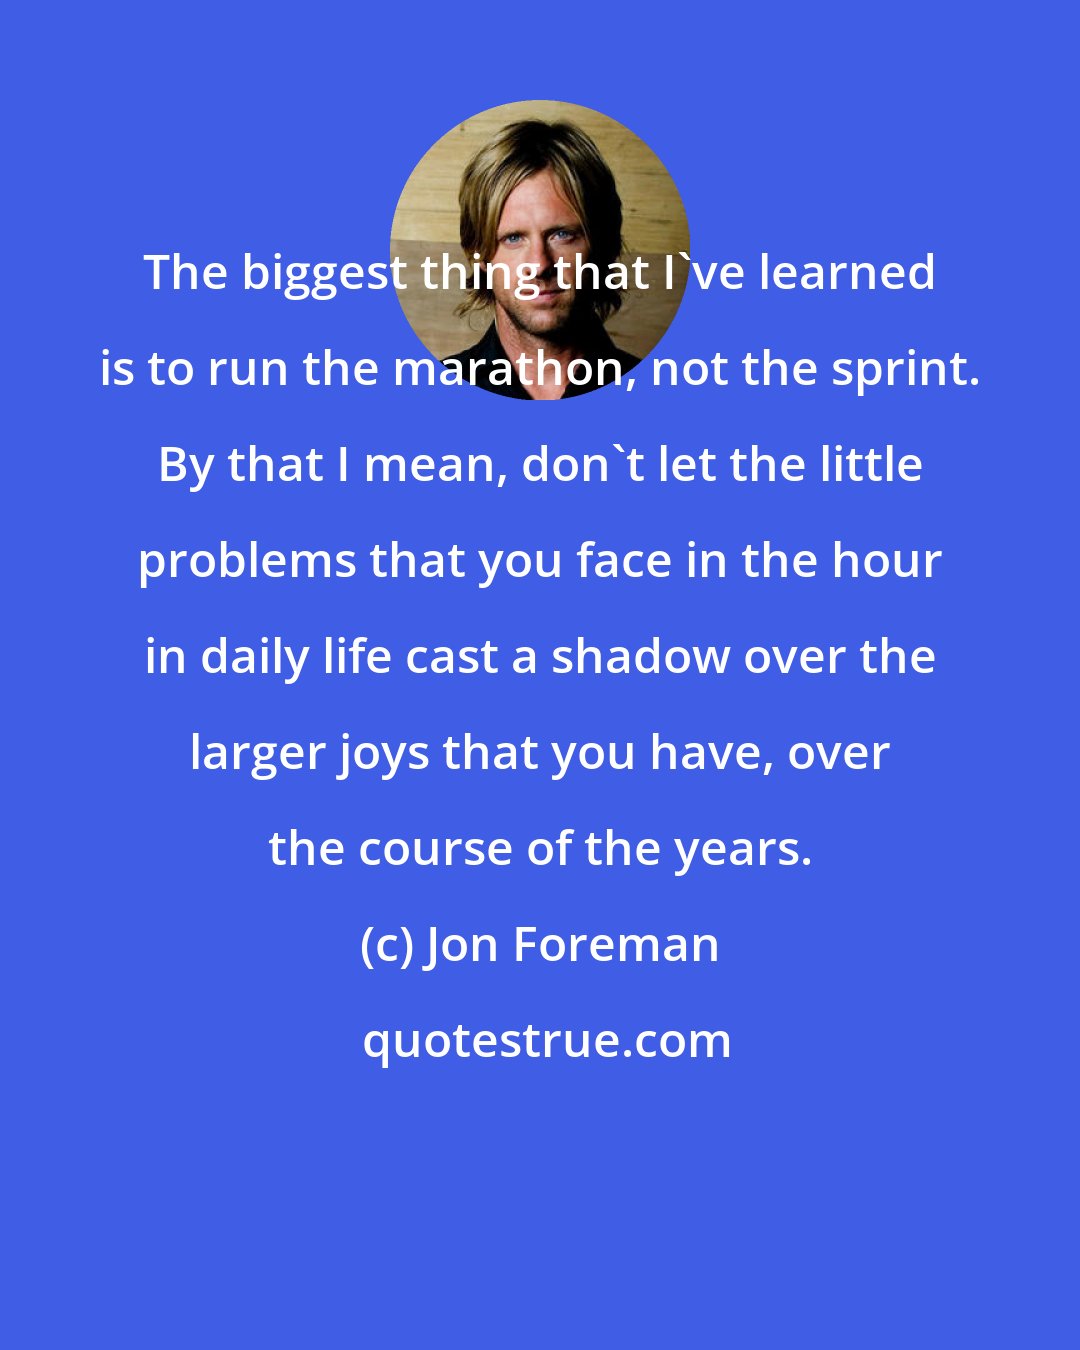 Jon Foreman: The biggest thing that I've learned is to run the marathon, not the sprint. By that I mean, don't let the little problems that you face in the hour in daily life cast a shadow over the larger joys that you have, over the course of the years.